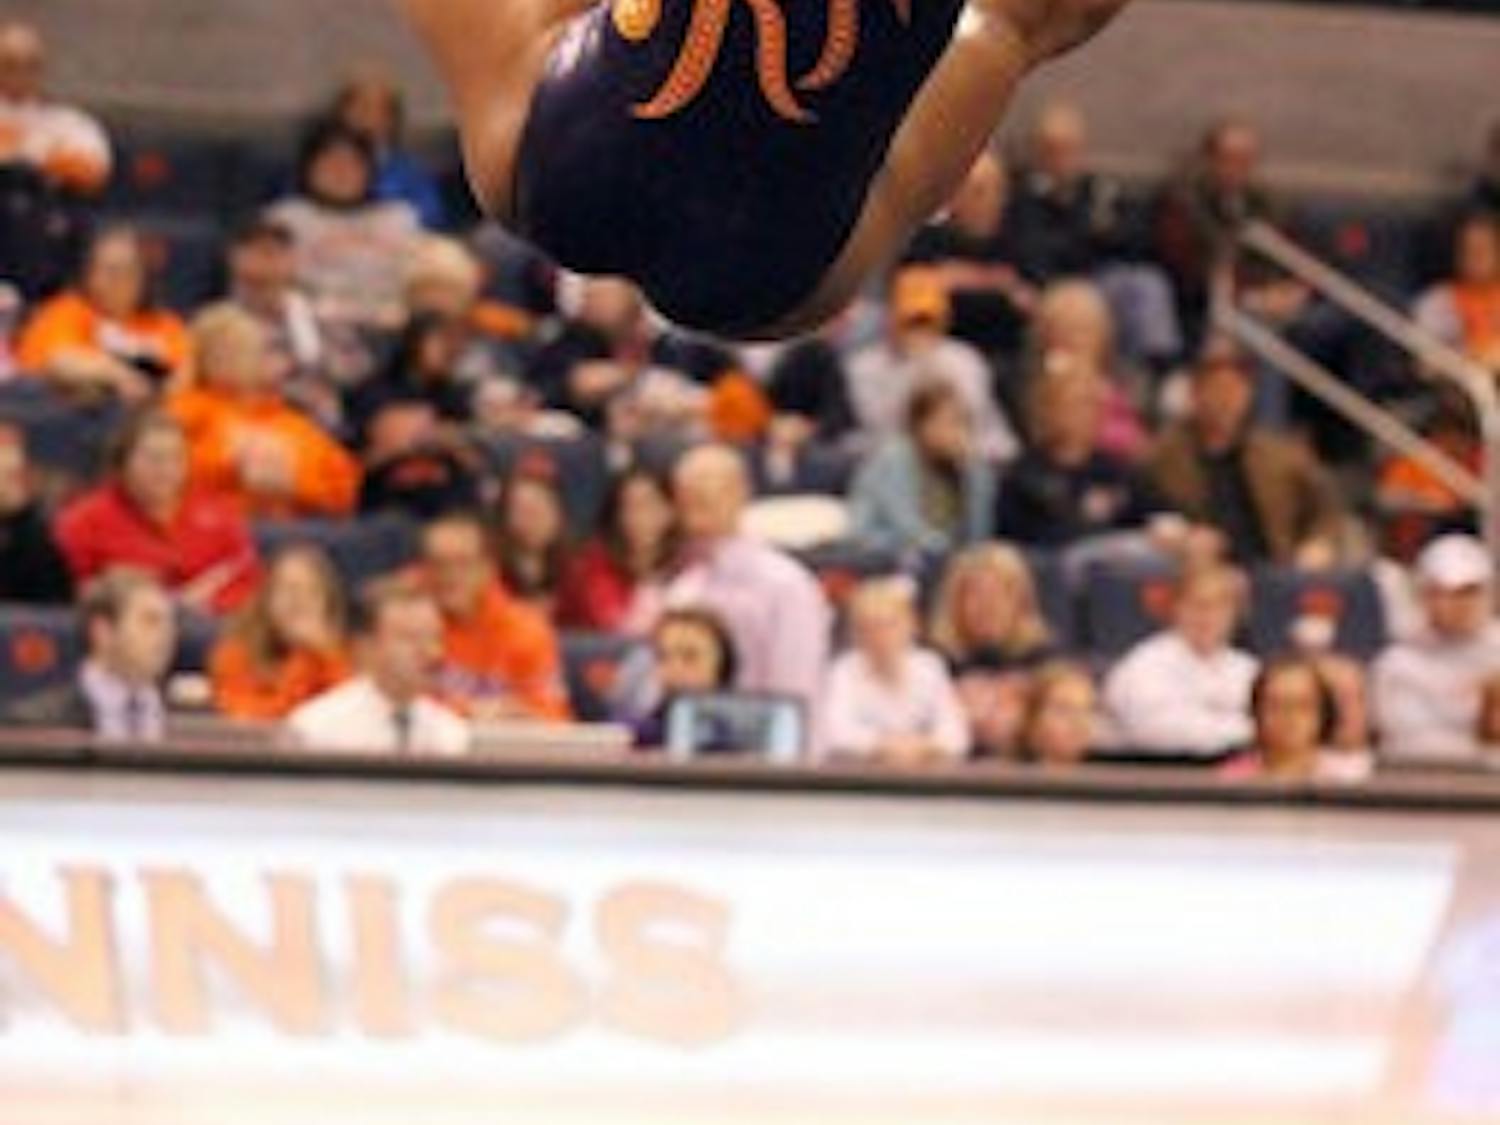 Rachel Inniss performs on the floor, scoring a 9.9 against LSU Friday night.